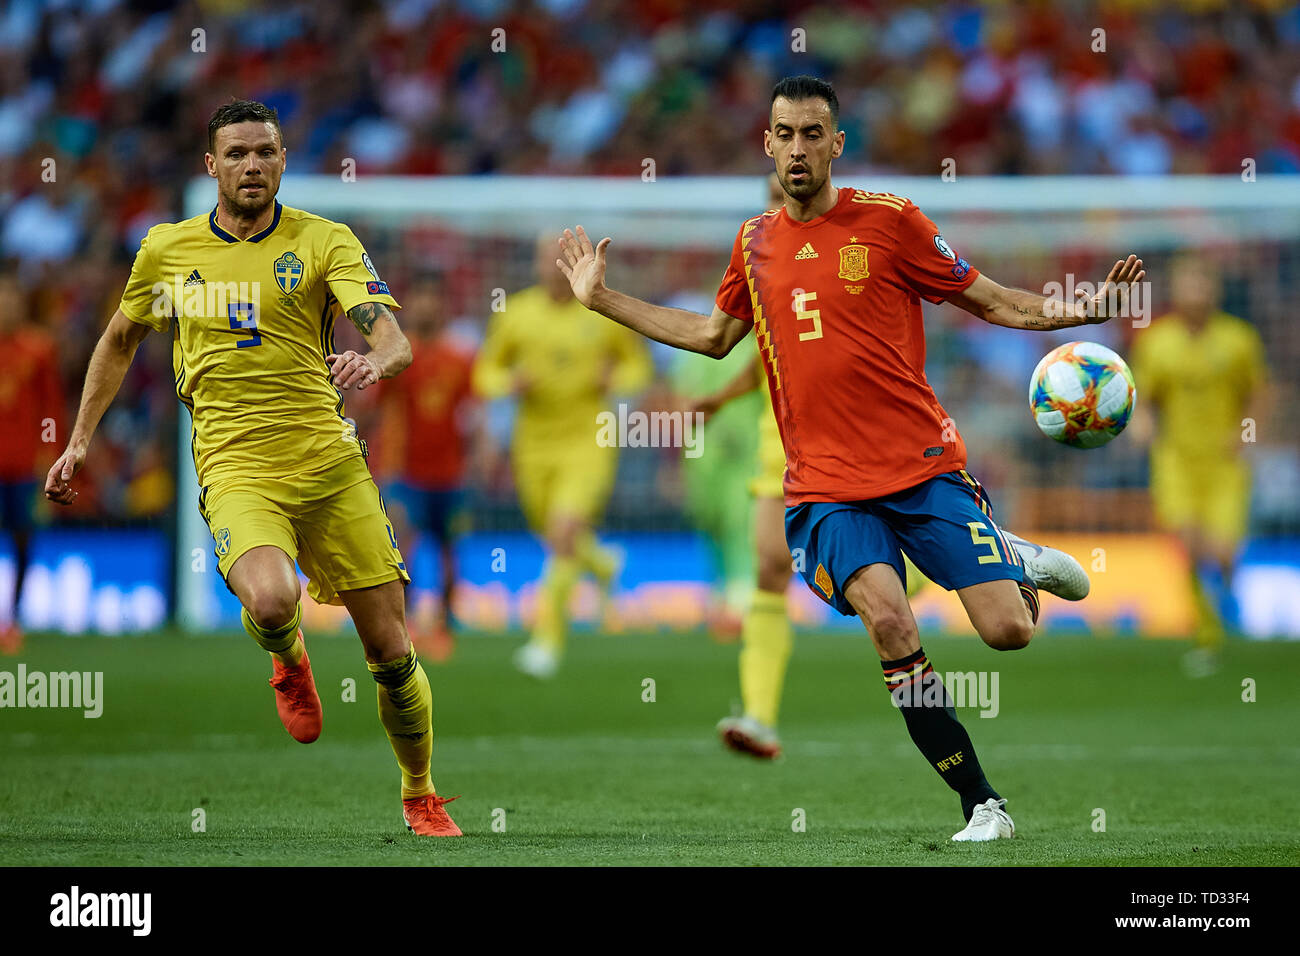 MADRID, SPAIN - JUNE 10: Sergio Busquets (R) of Spain in action next to Marcus Berg of Sweden during the UEFA Euro 2020 qualifier match between Spain and Sweden at Santiago Bernabeu on June 10, 2019 in Madrid, Spain. (Photo by David Aliaga/MB Media) Stock Photo